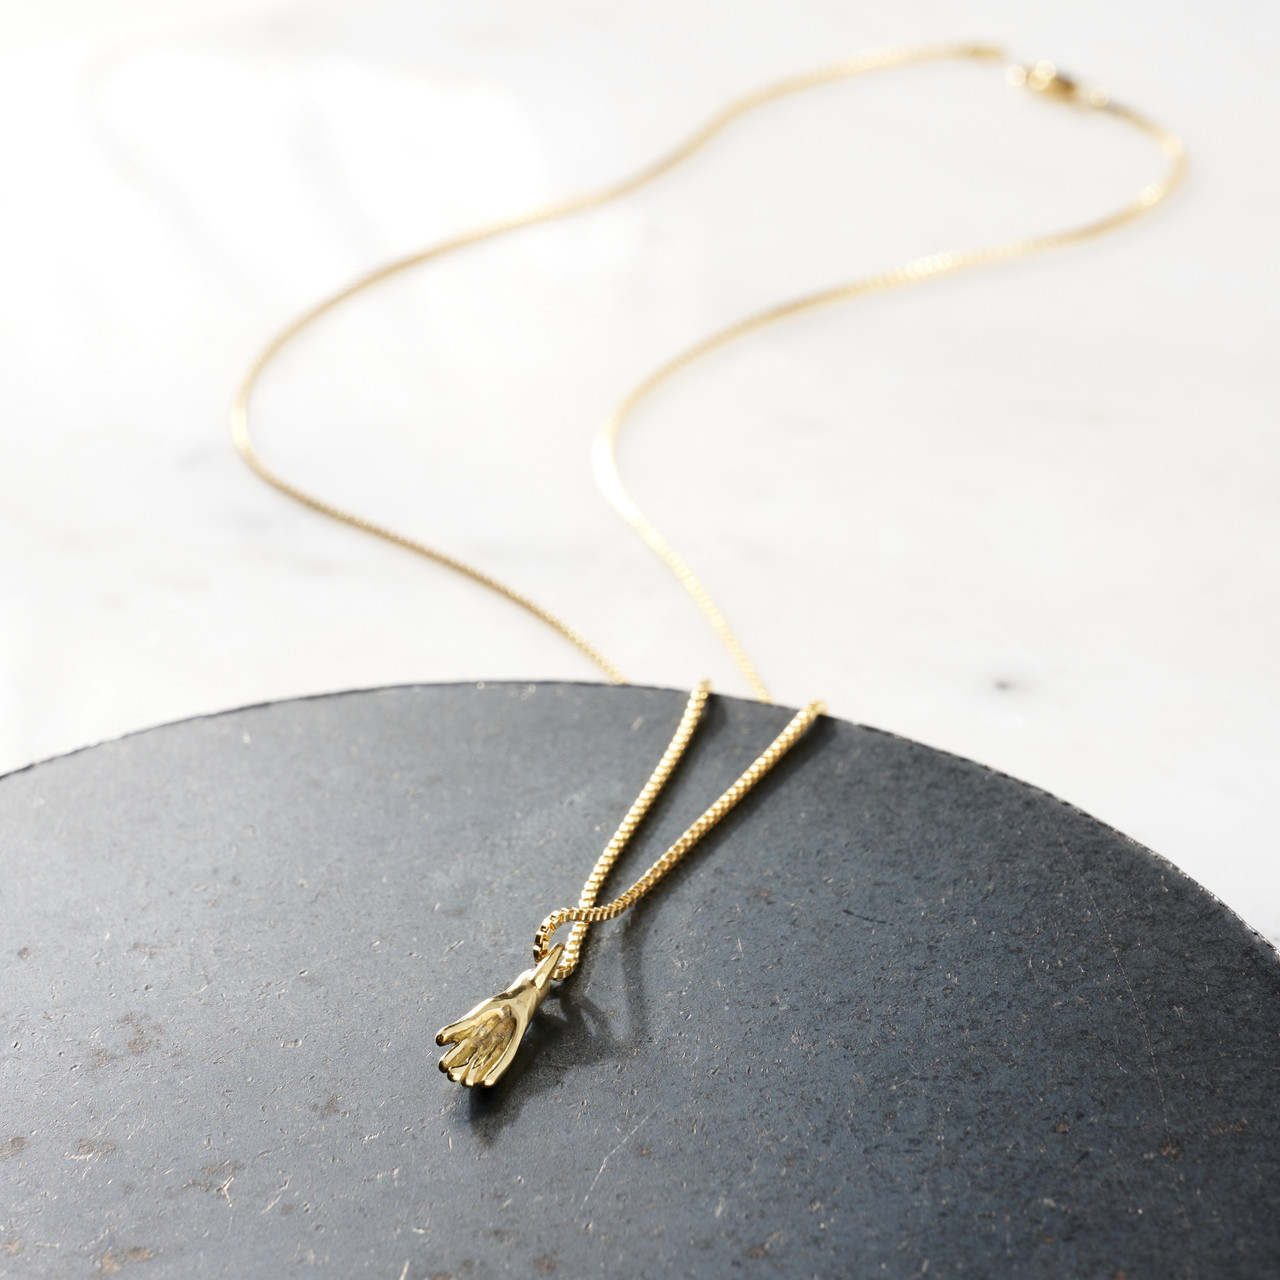 Give and Receive Brass Necklace by Moon + Arrow - Philadelphia